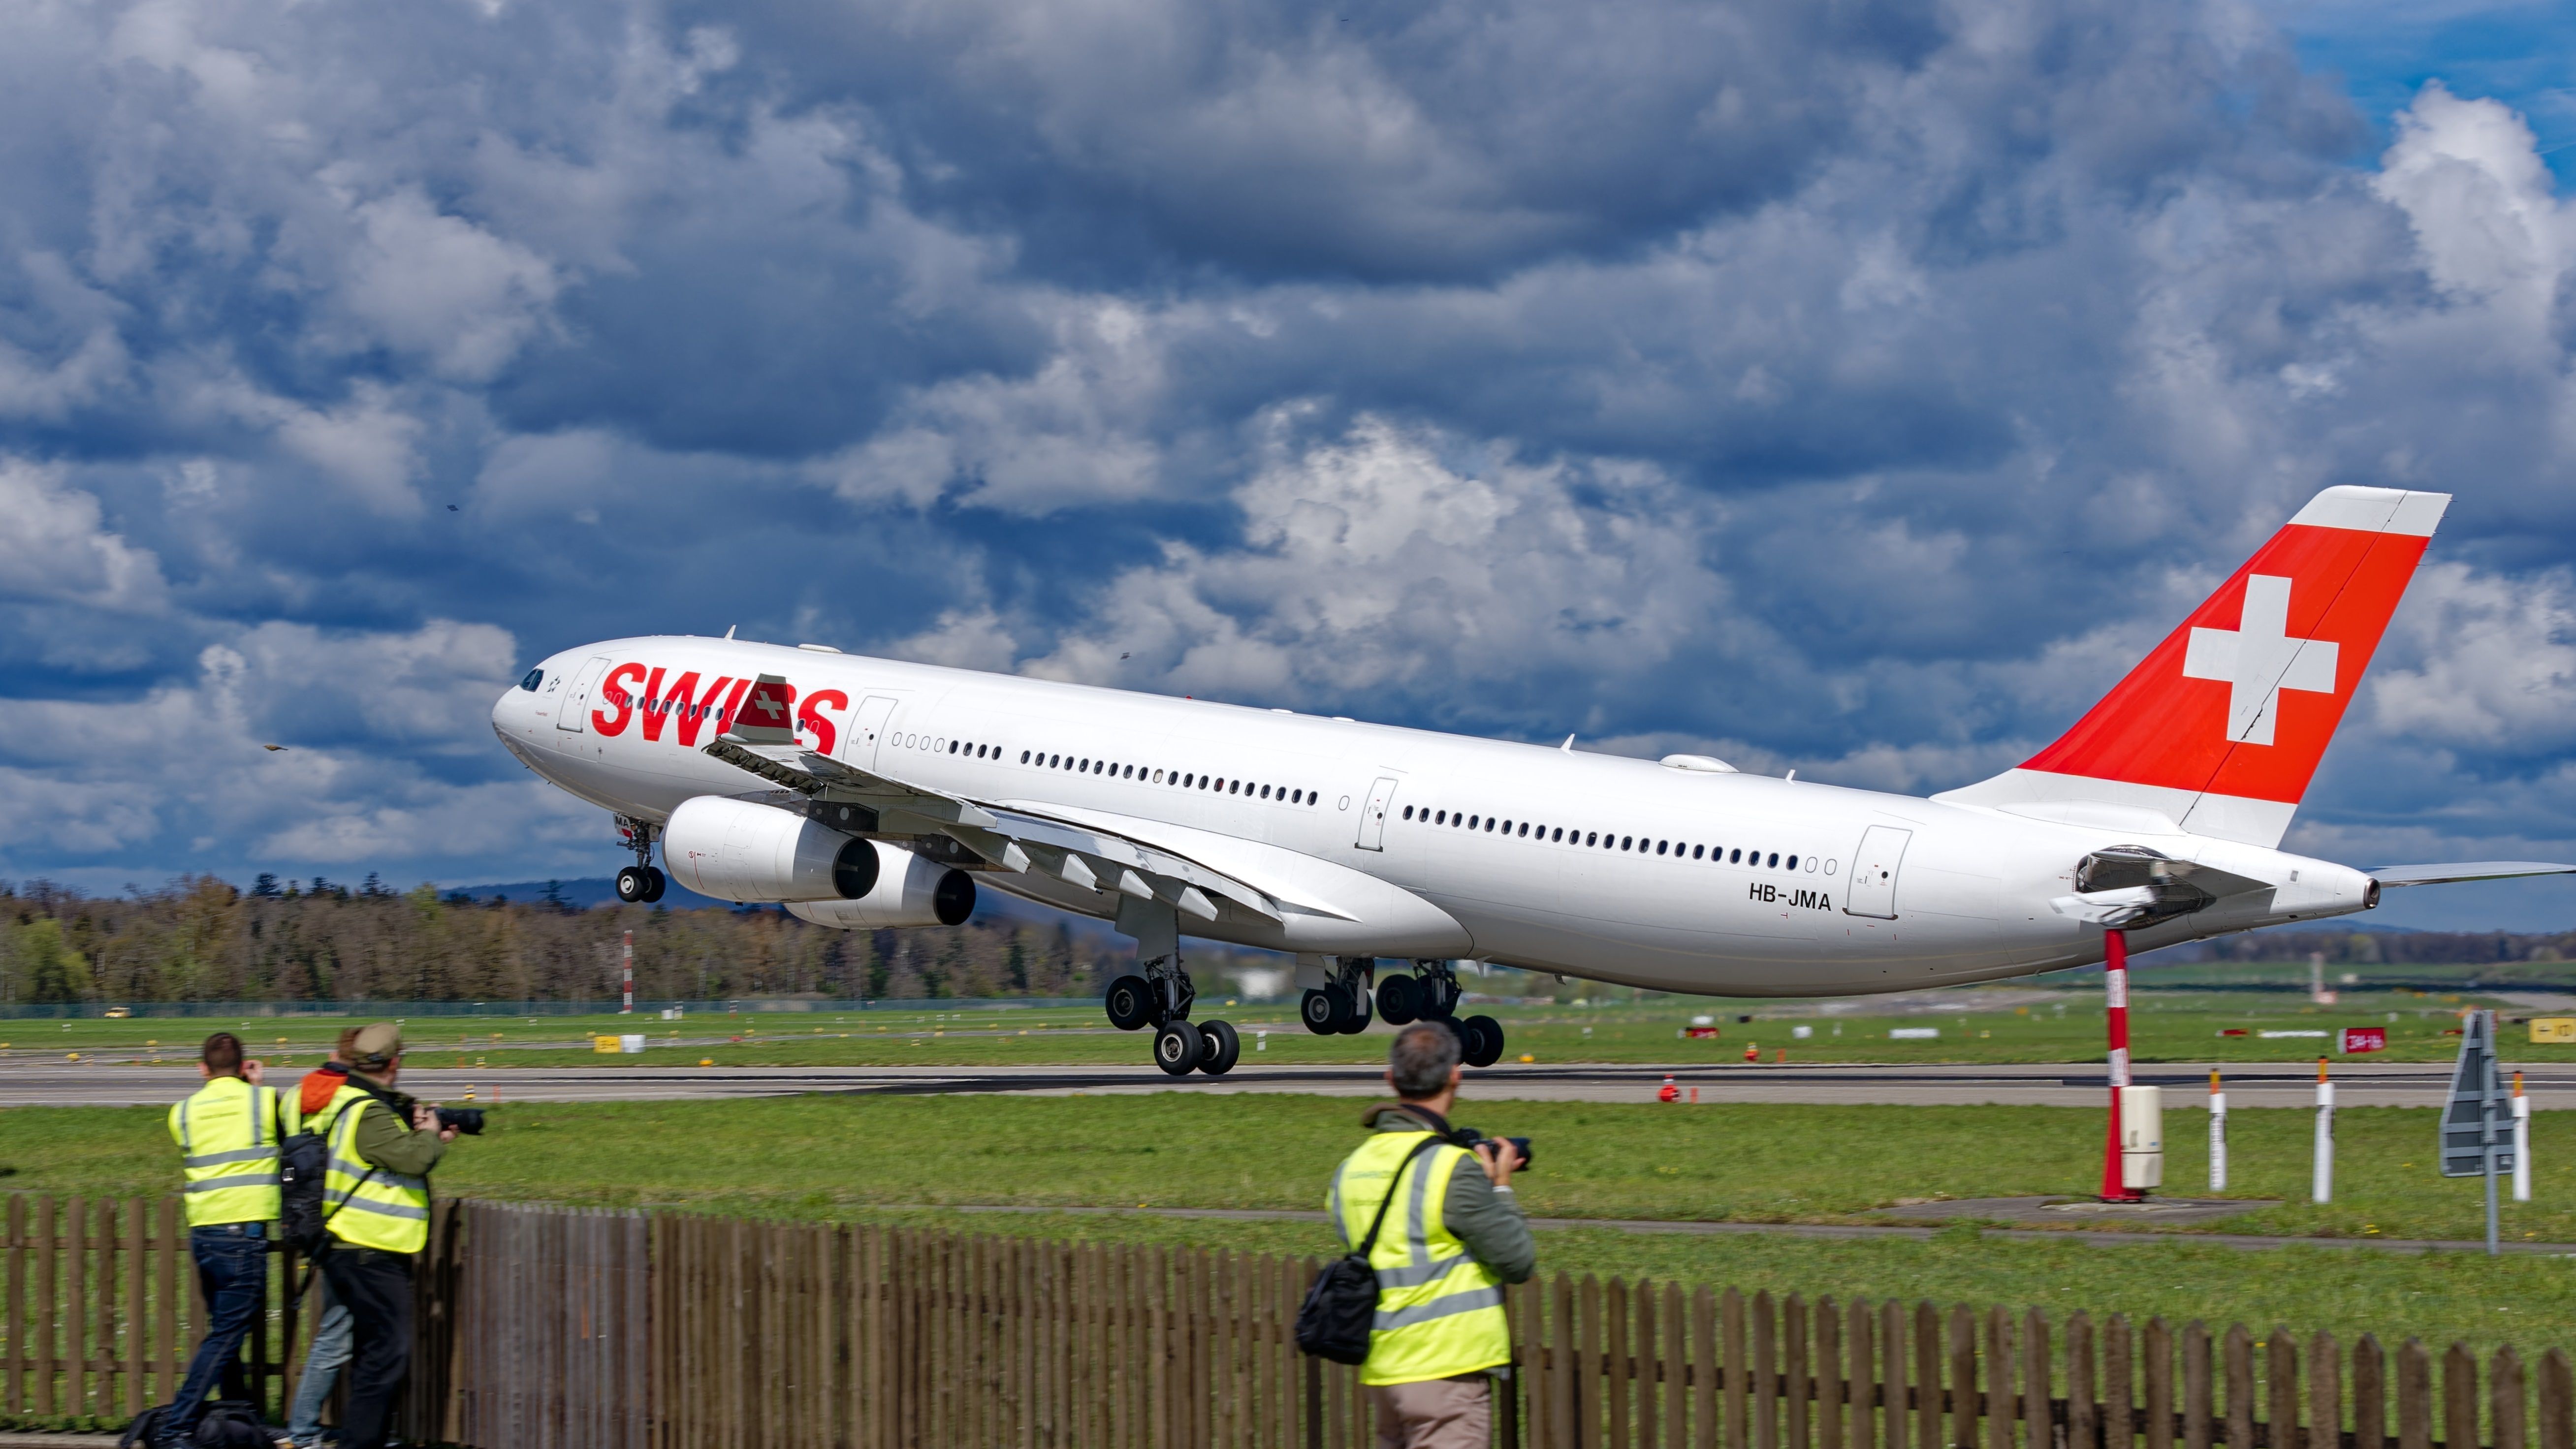 SWISS A340-300 taking off from Zurich